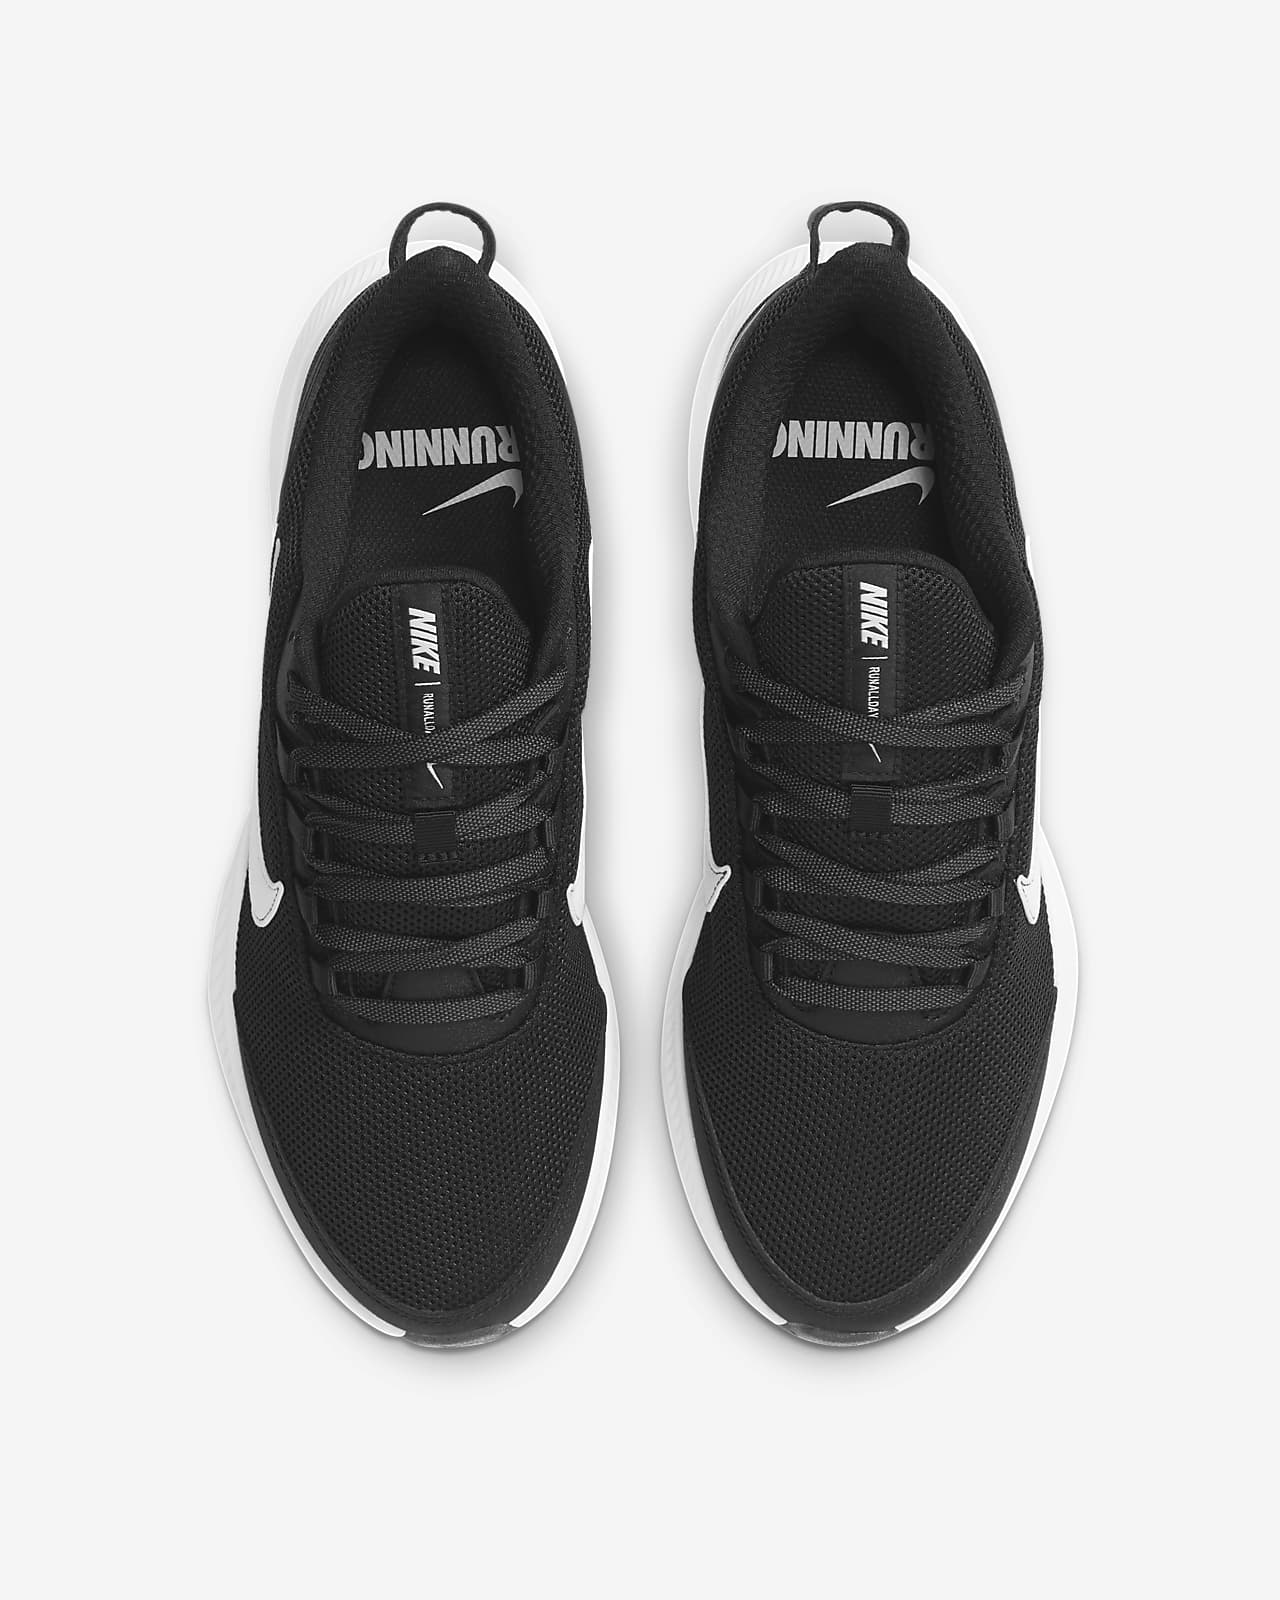 all black nike shoes running